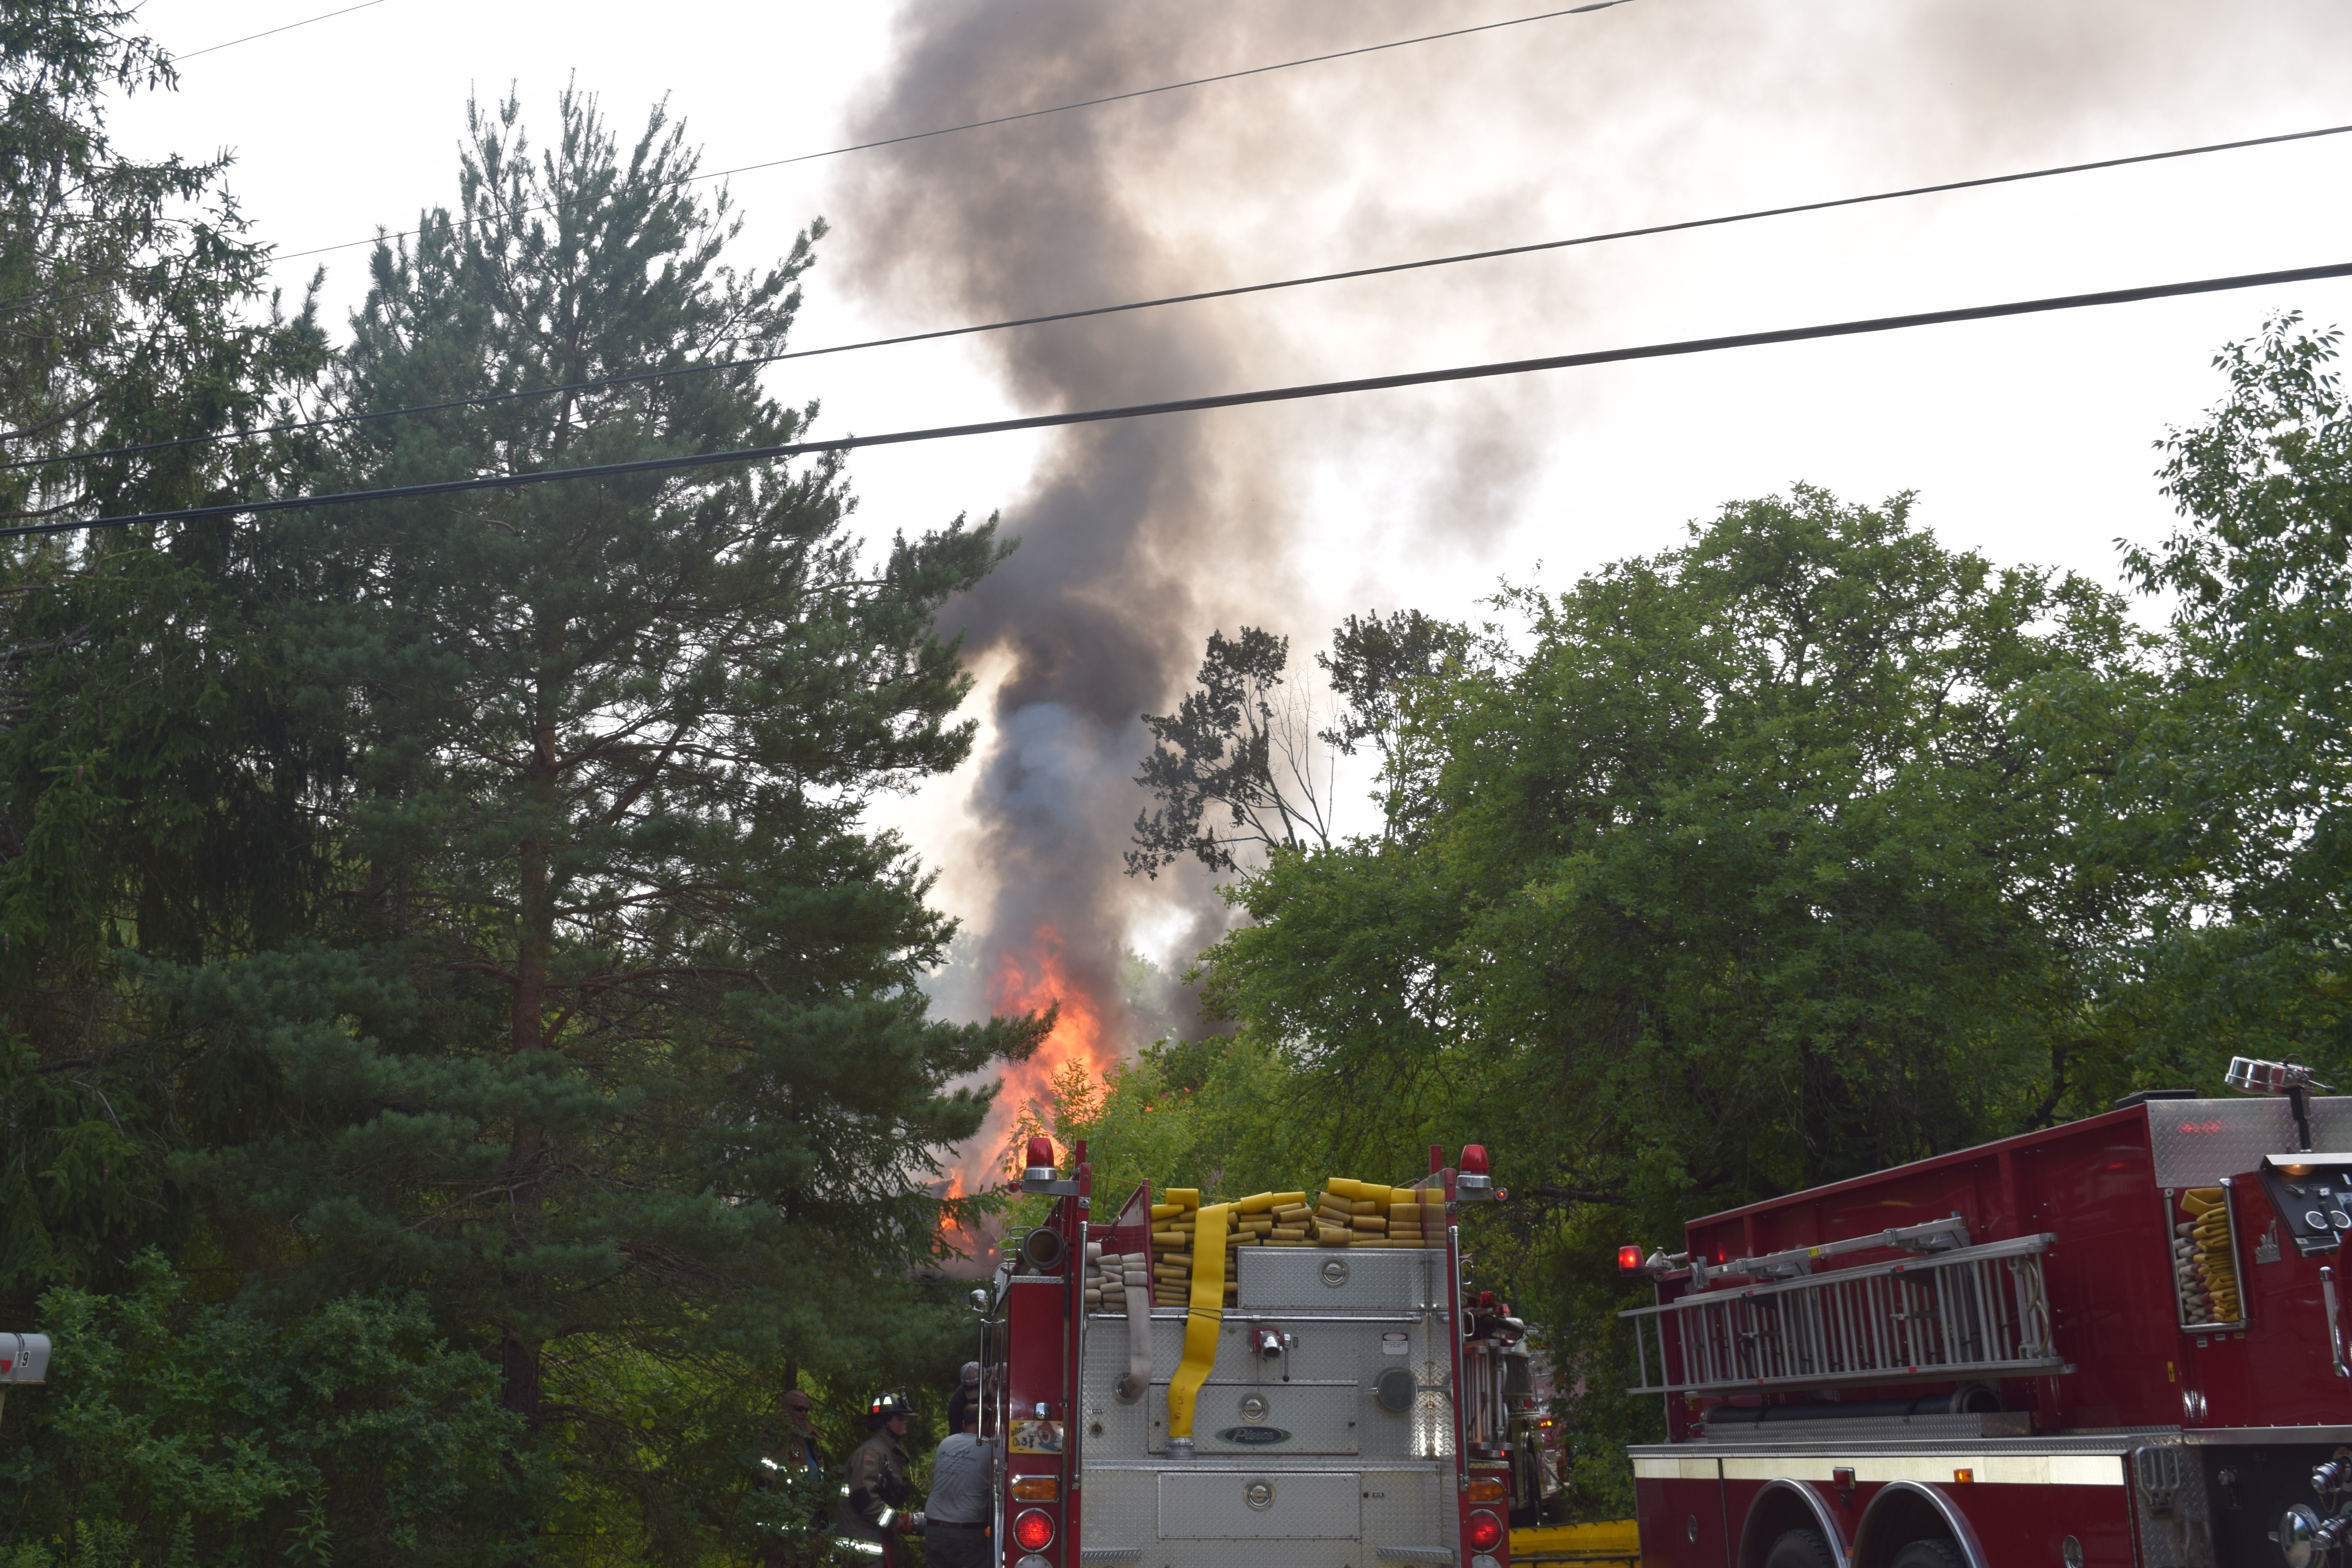 Flames and smoke rise from a house fire on Calls Hill Road in Dresden on Monday, July 16. (Jessica Clifford photo)